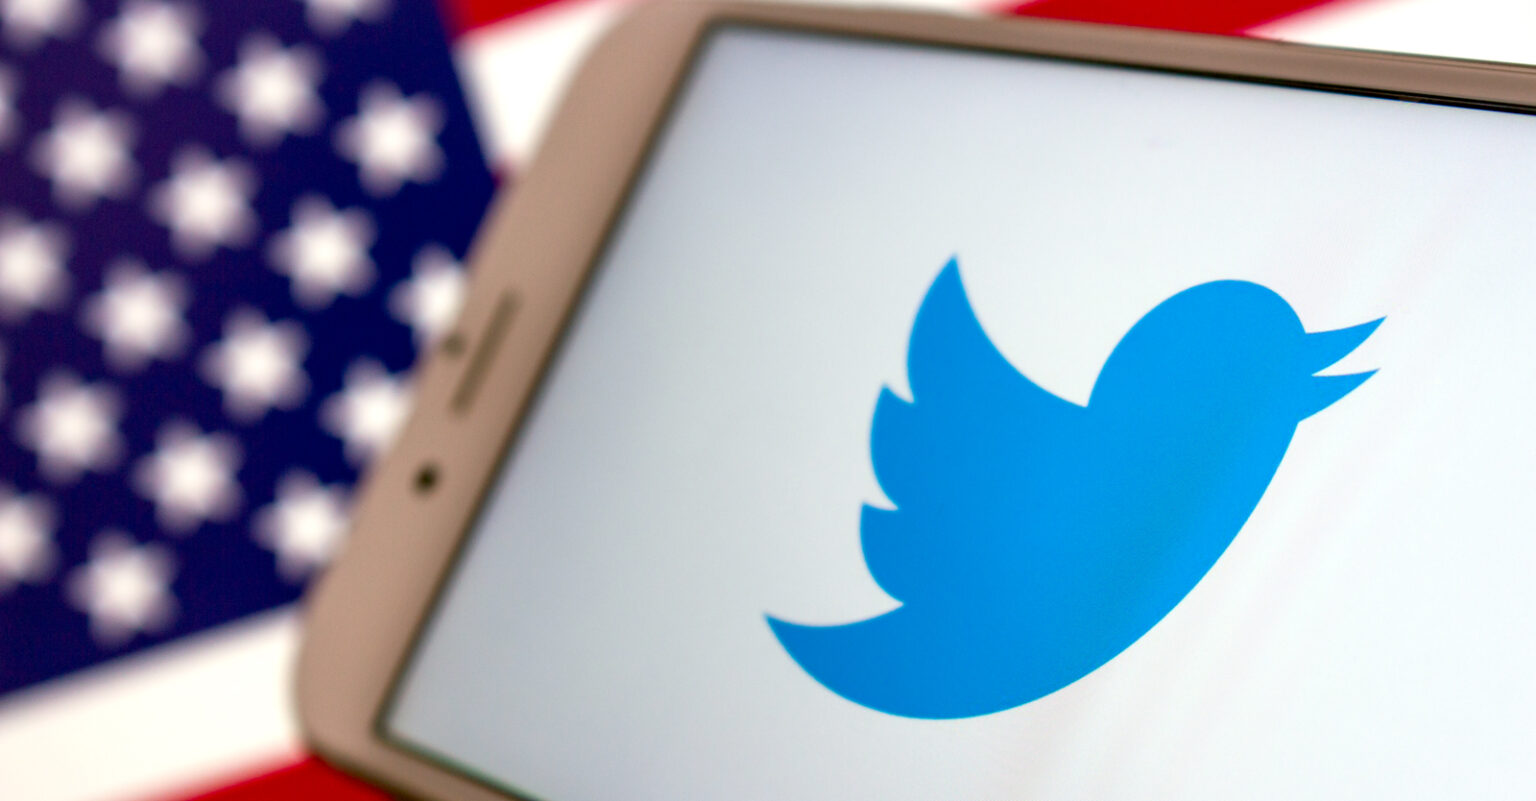 Surgeon General, HHS Violated First Amendment by Directing Twitter to Censor COVID ‘Misinformation,’ Lawsuit Alleges